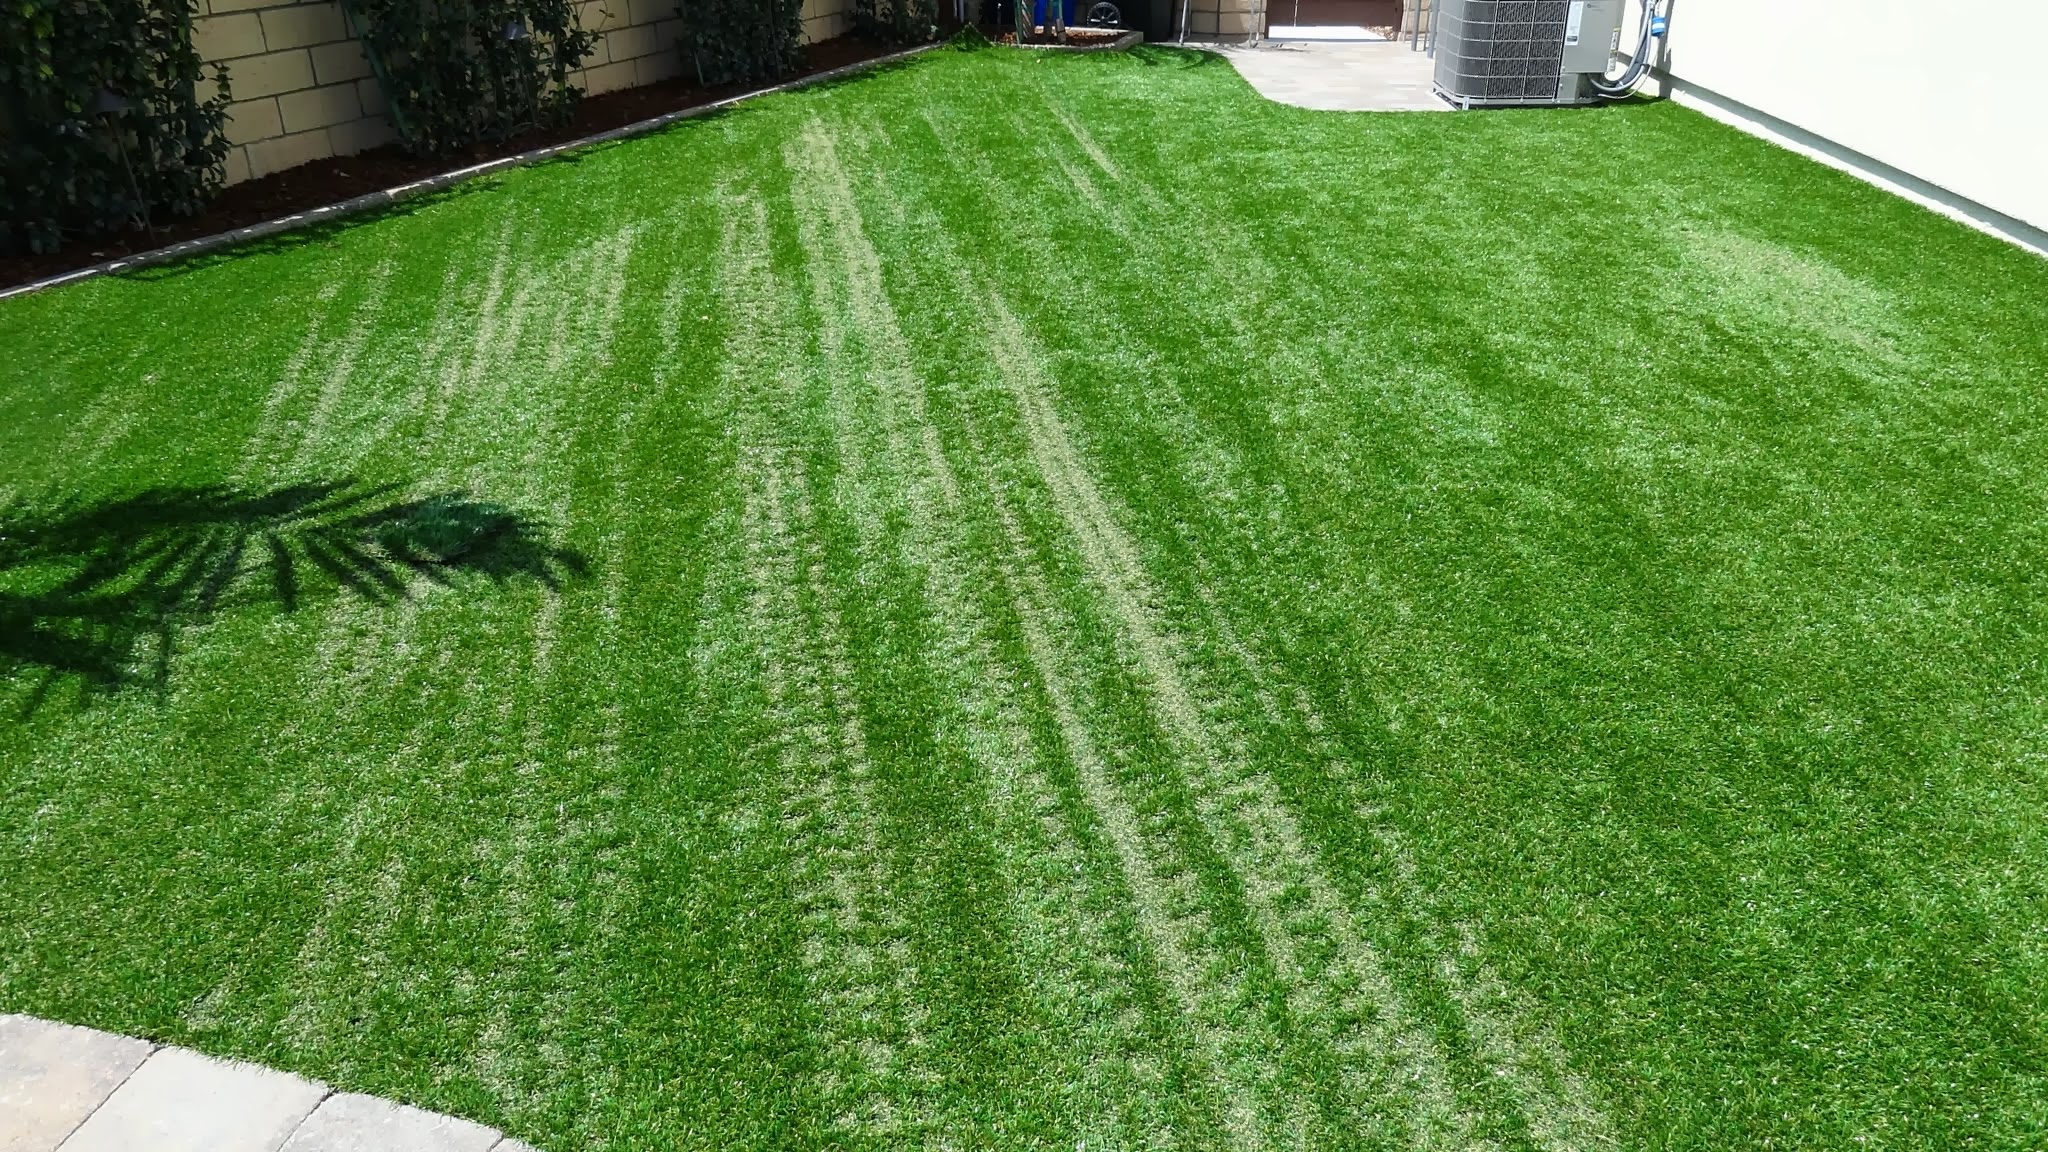 How To Prevent The Artificial Grass From Getting Burned In Bonita?